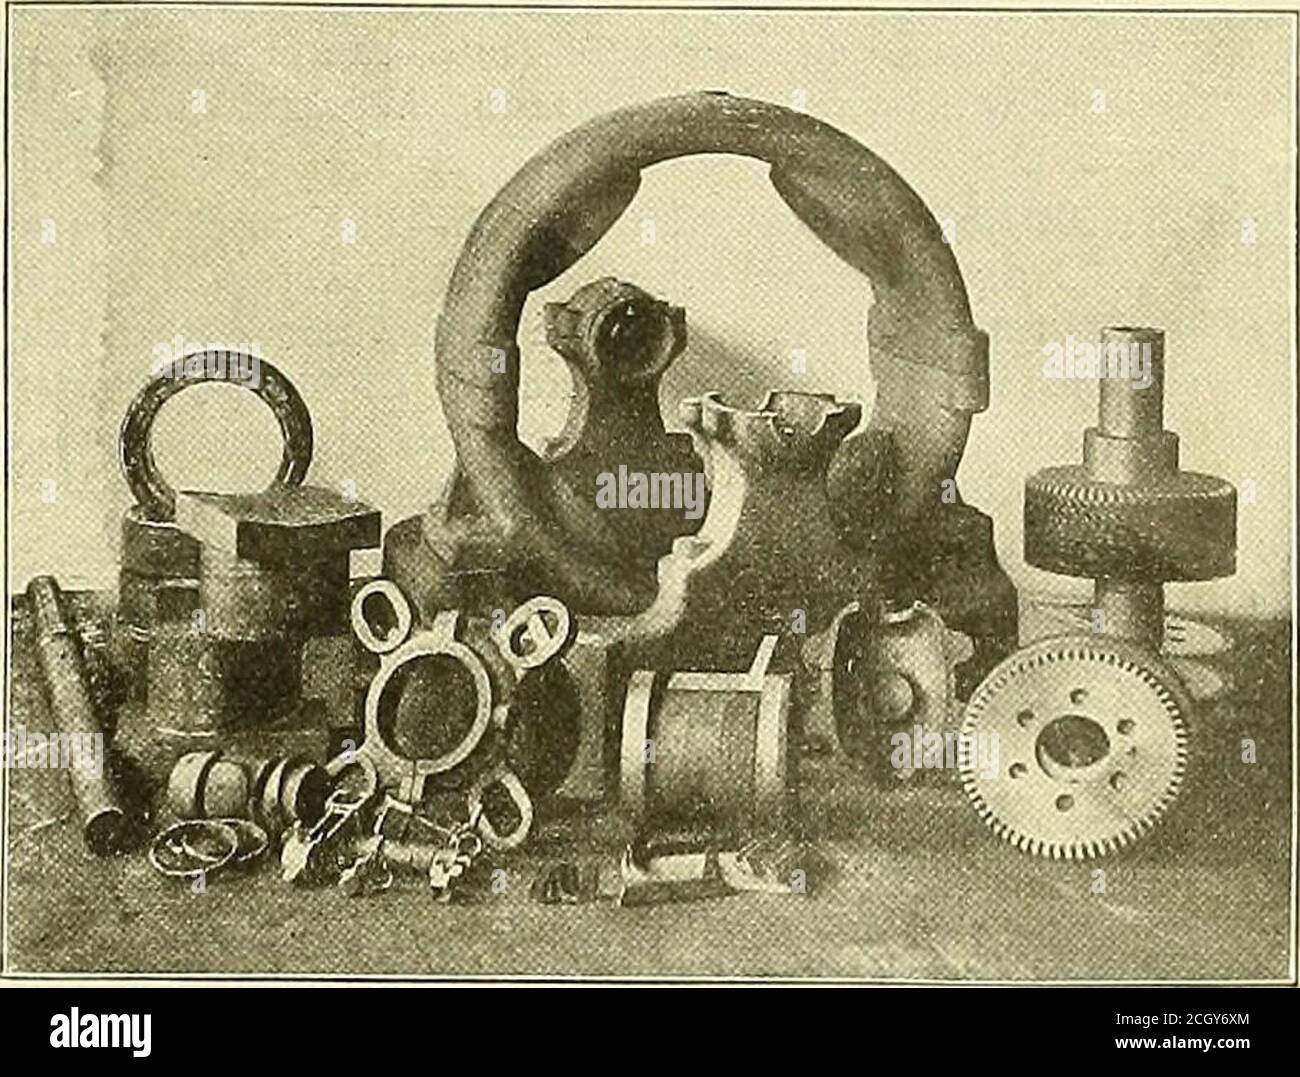 Electric railway gazette . FIG. I.—GENERATOR WITH ARMATURE AND BRUSHES  REMOVED. which has very short radial projections, faced off tomake good  magnetic contact; this construction allowsthe removal of any magnet core